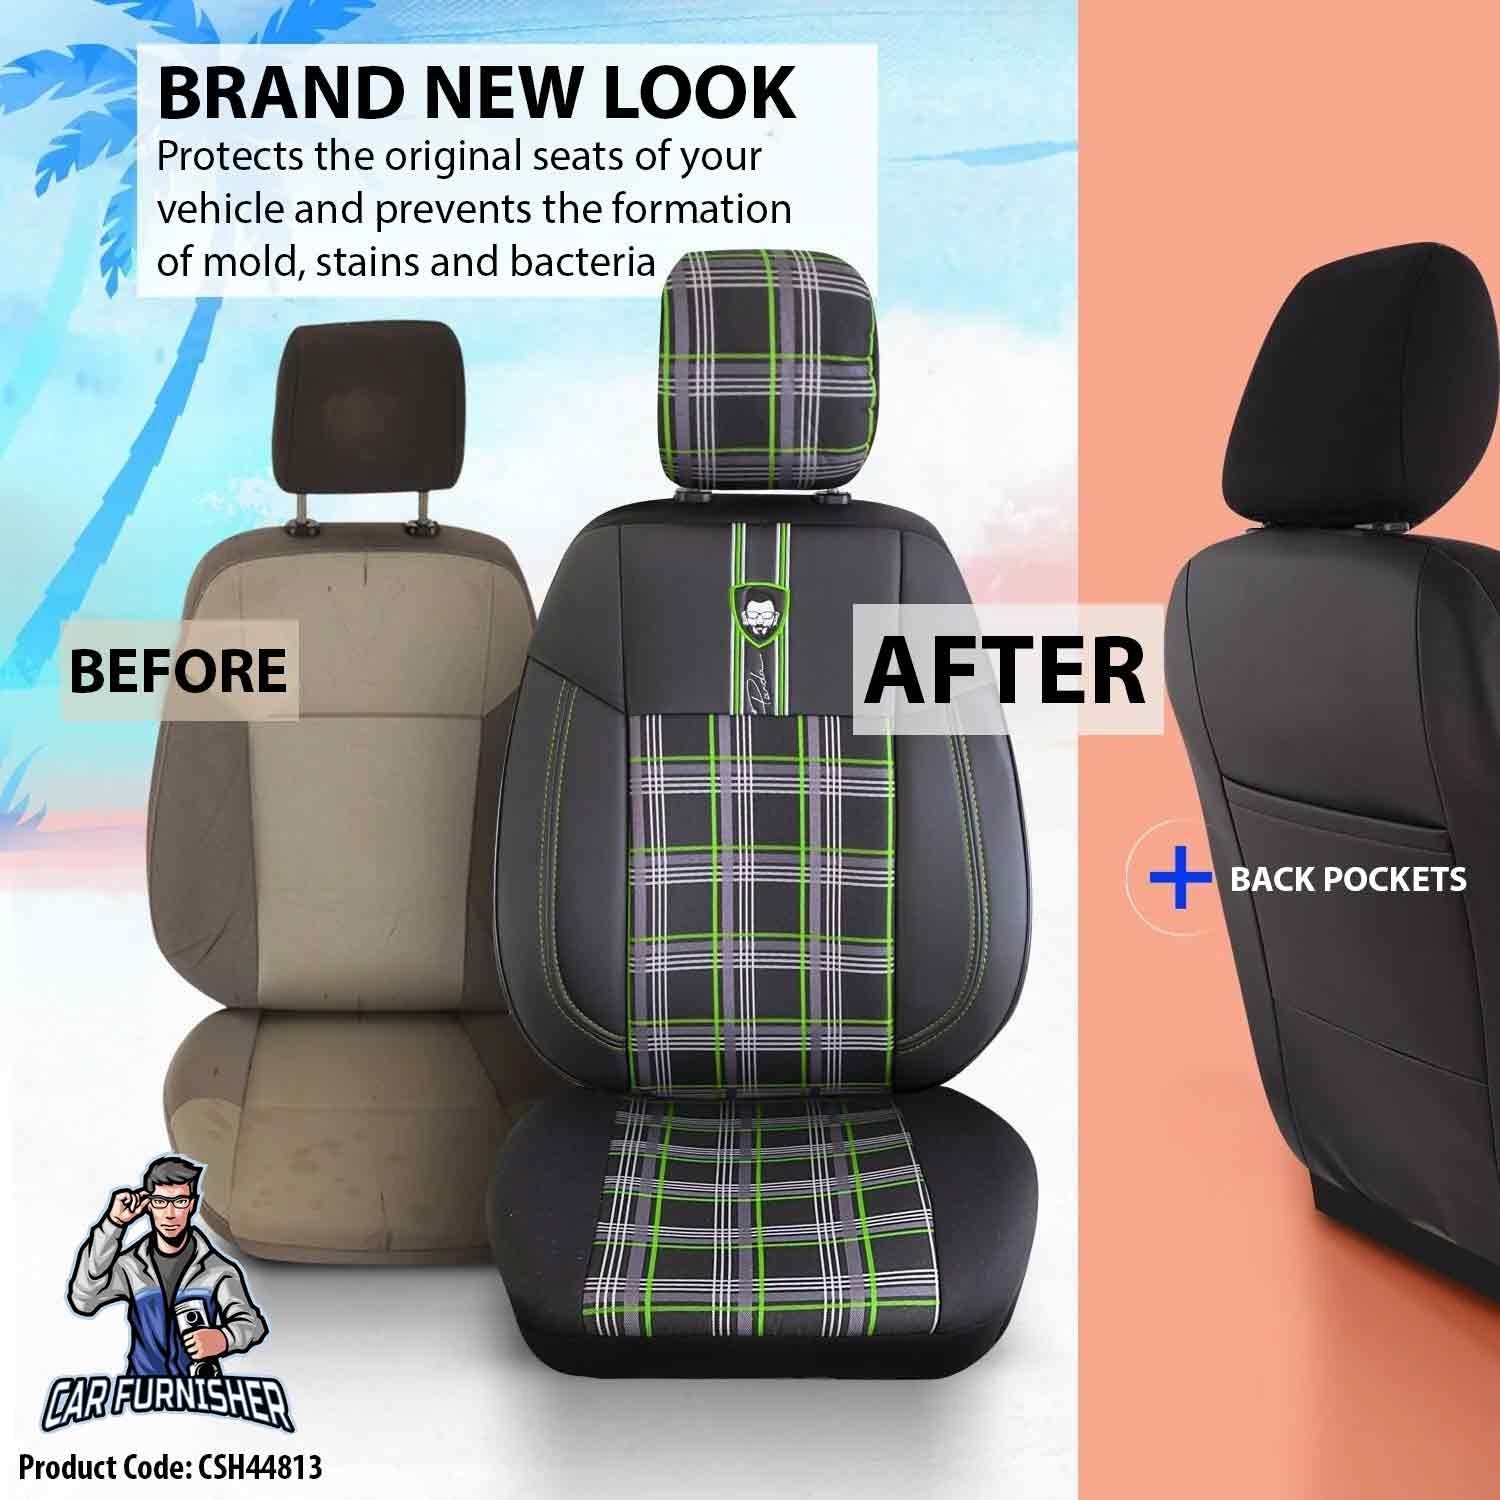 Car Seat Cover Set - Cesme Design Green 5 Seats + Headrests (Full Set) Leather & Plaid Fabric